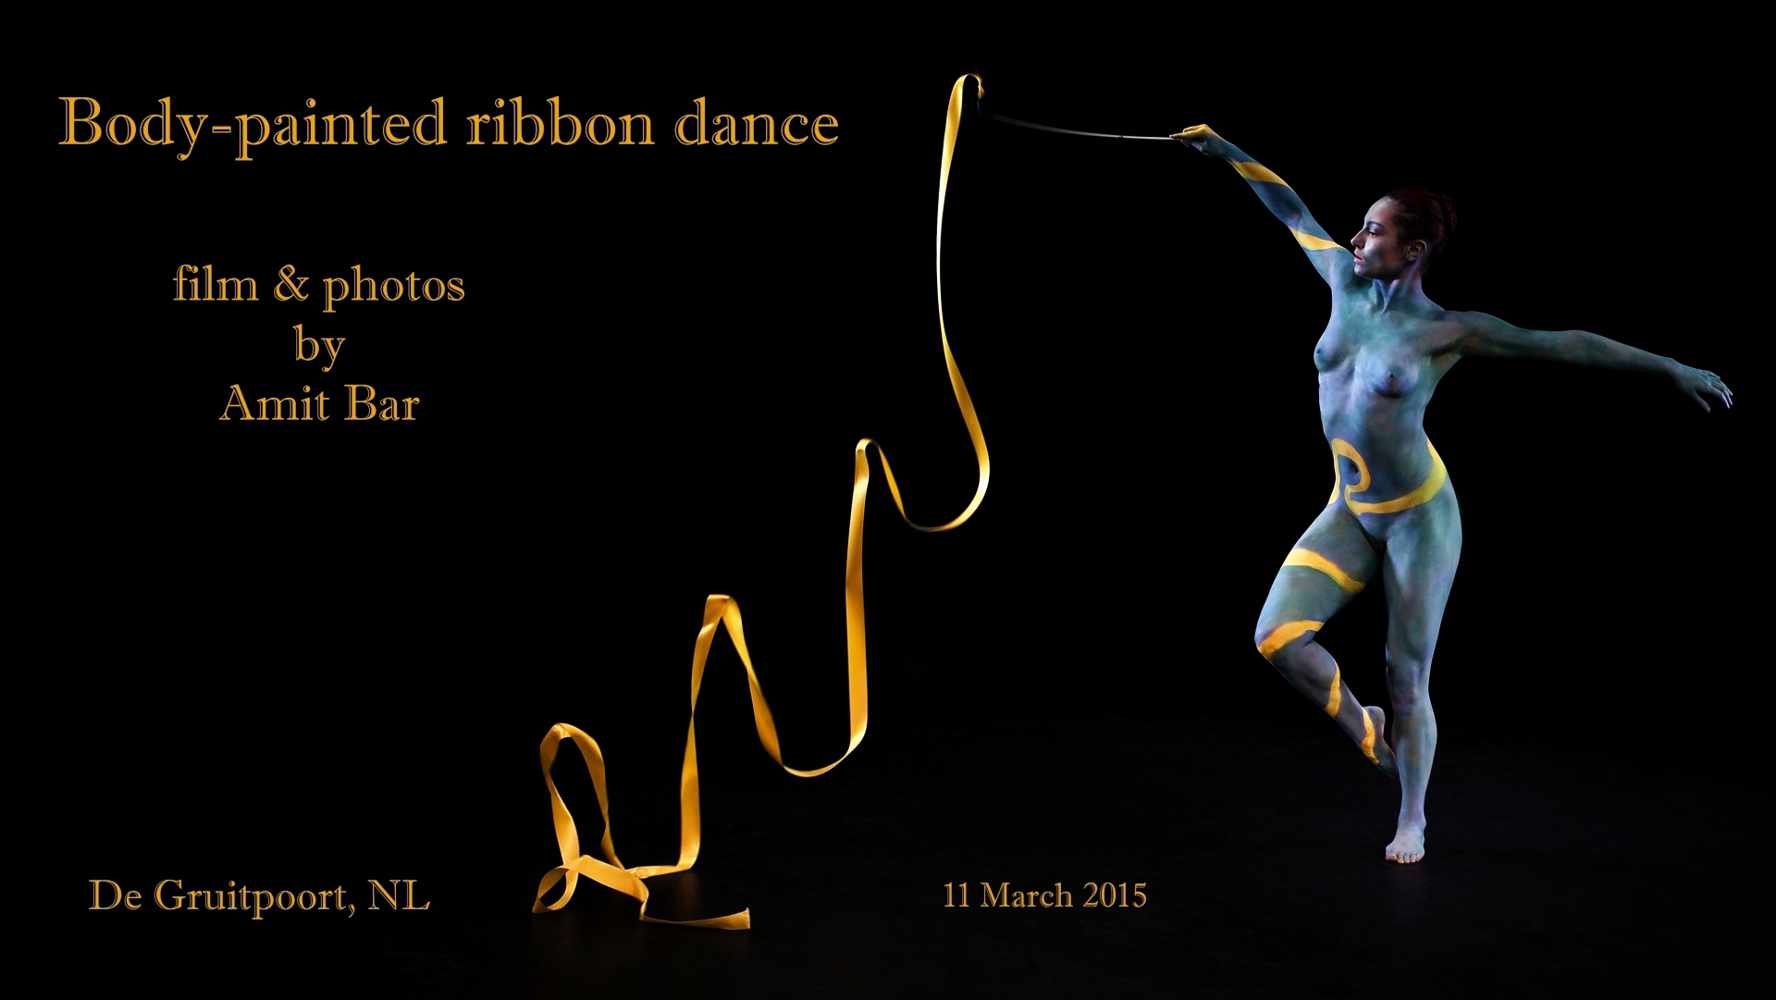 Ribbon dance video: Body-painted Ana is dancing beautifully with a ribbon to the tunes of Leroy Anderson.